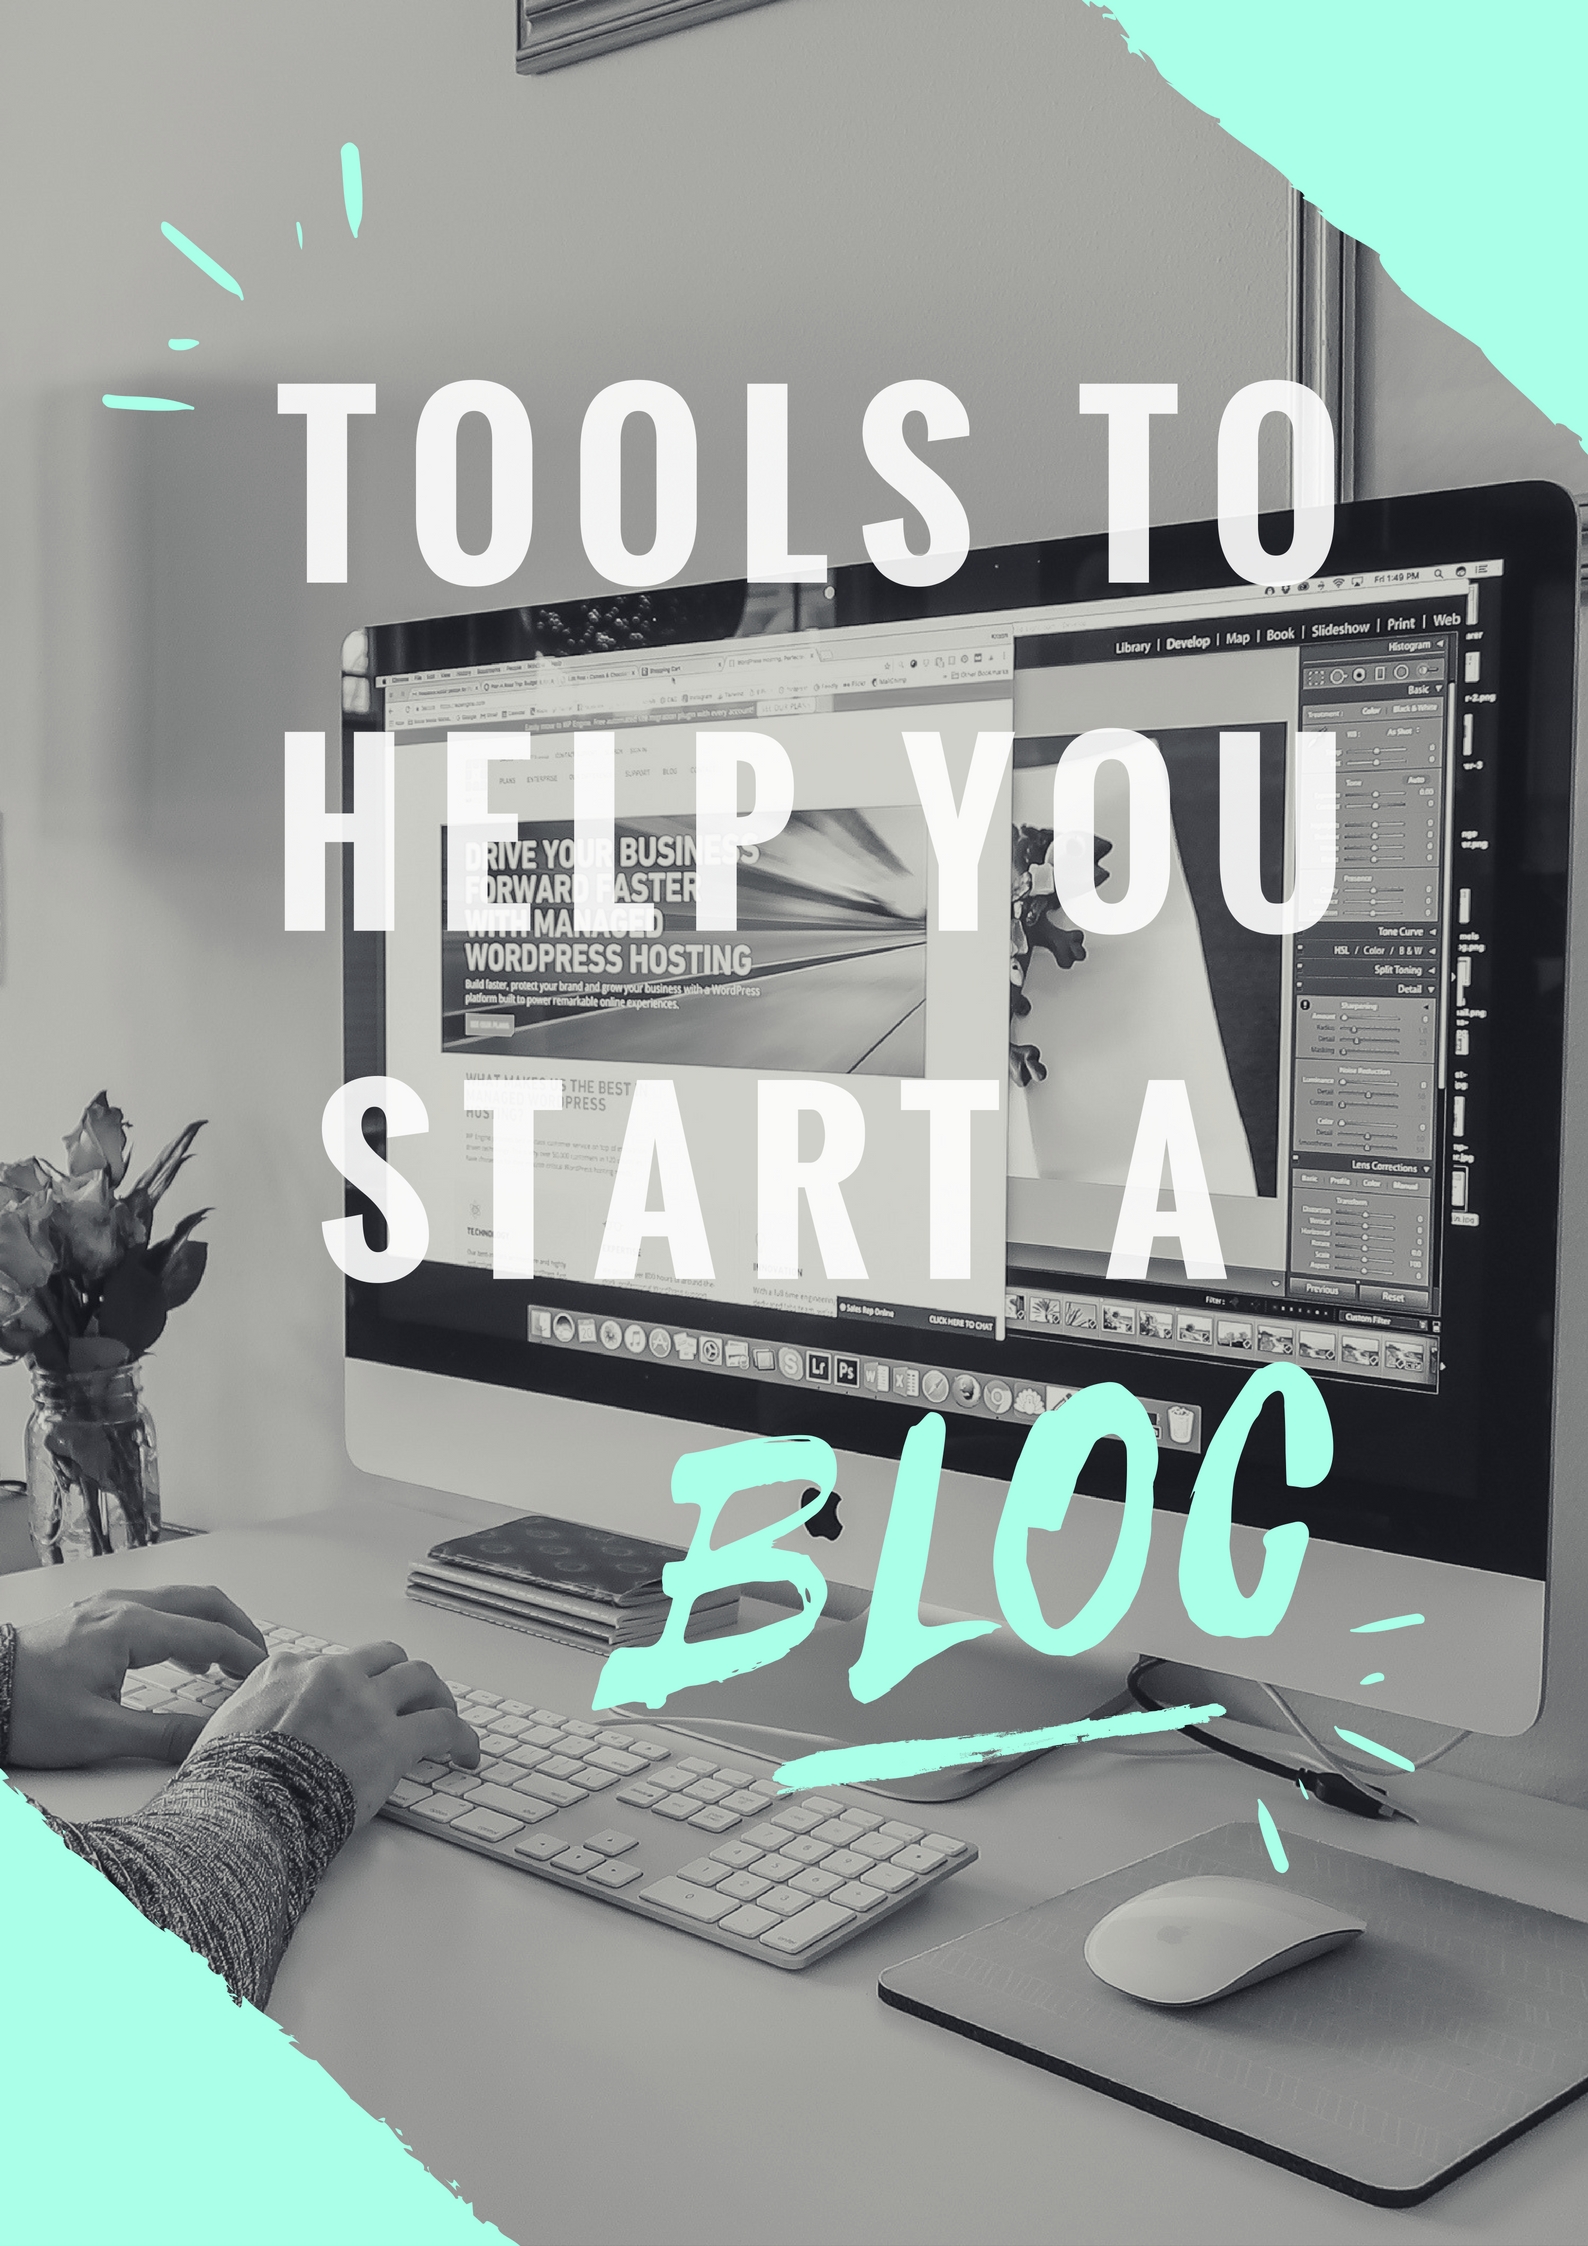 The Basics of Blogging: Everything You Need to Know from Hosting to Scheduling Apps